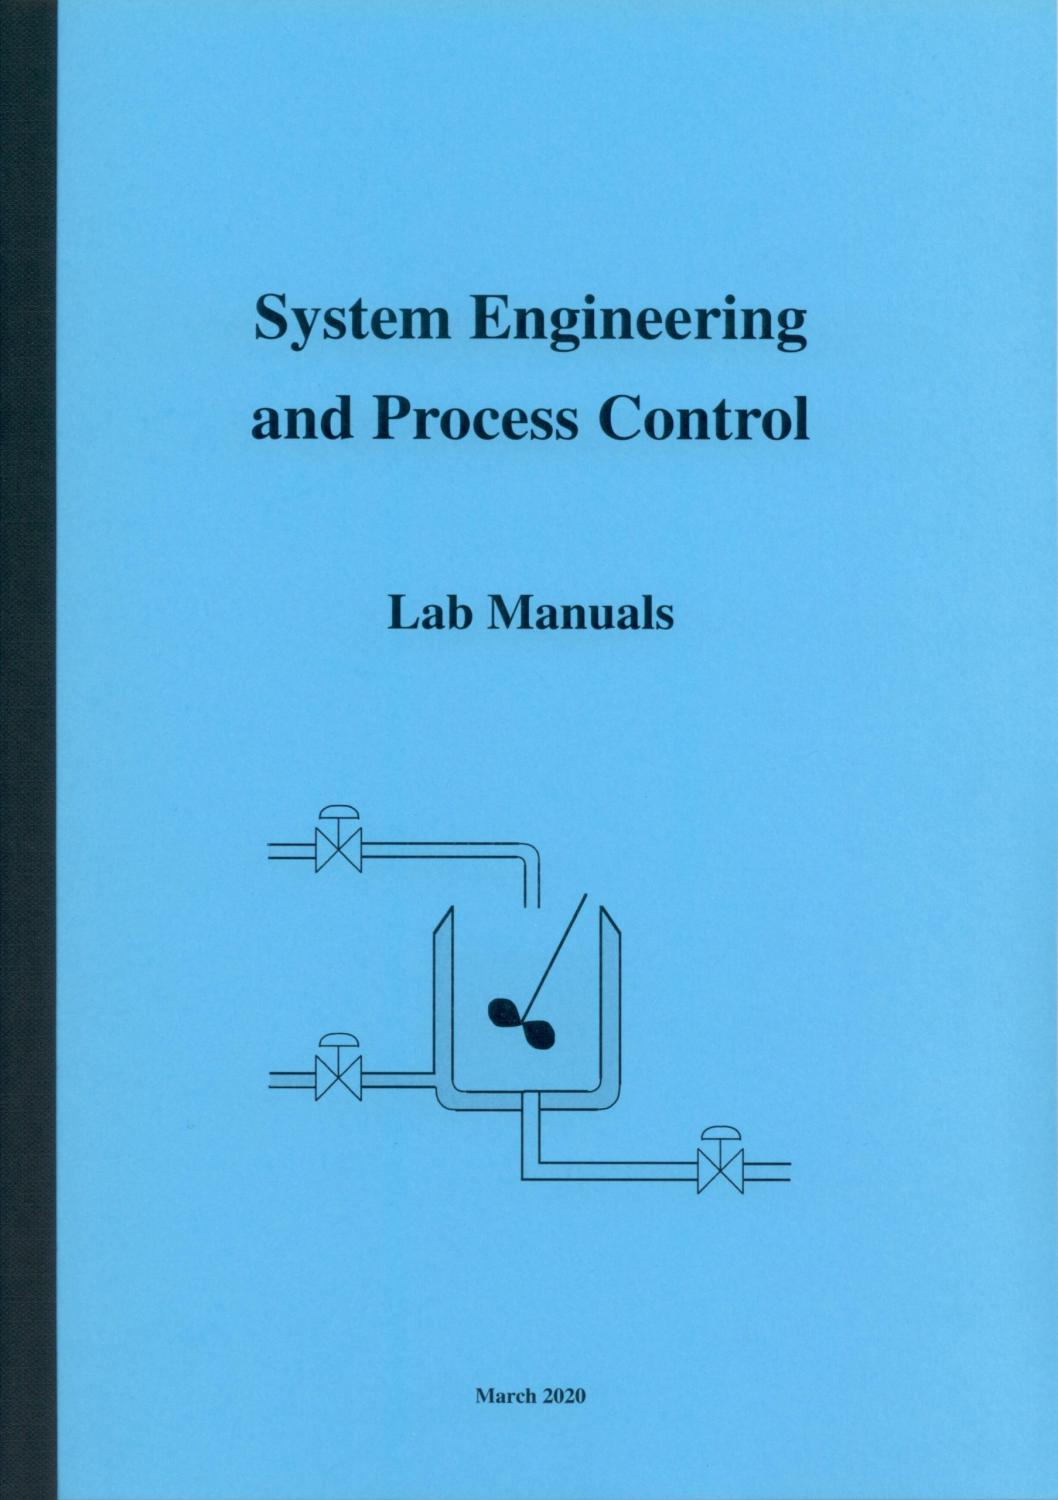 System Engineering and Process Control, Lab Manual, 2020